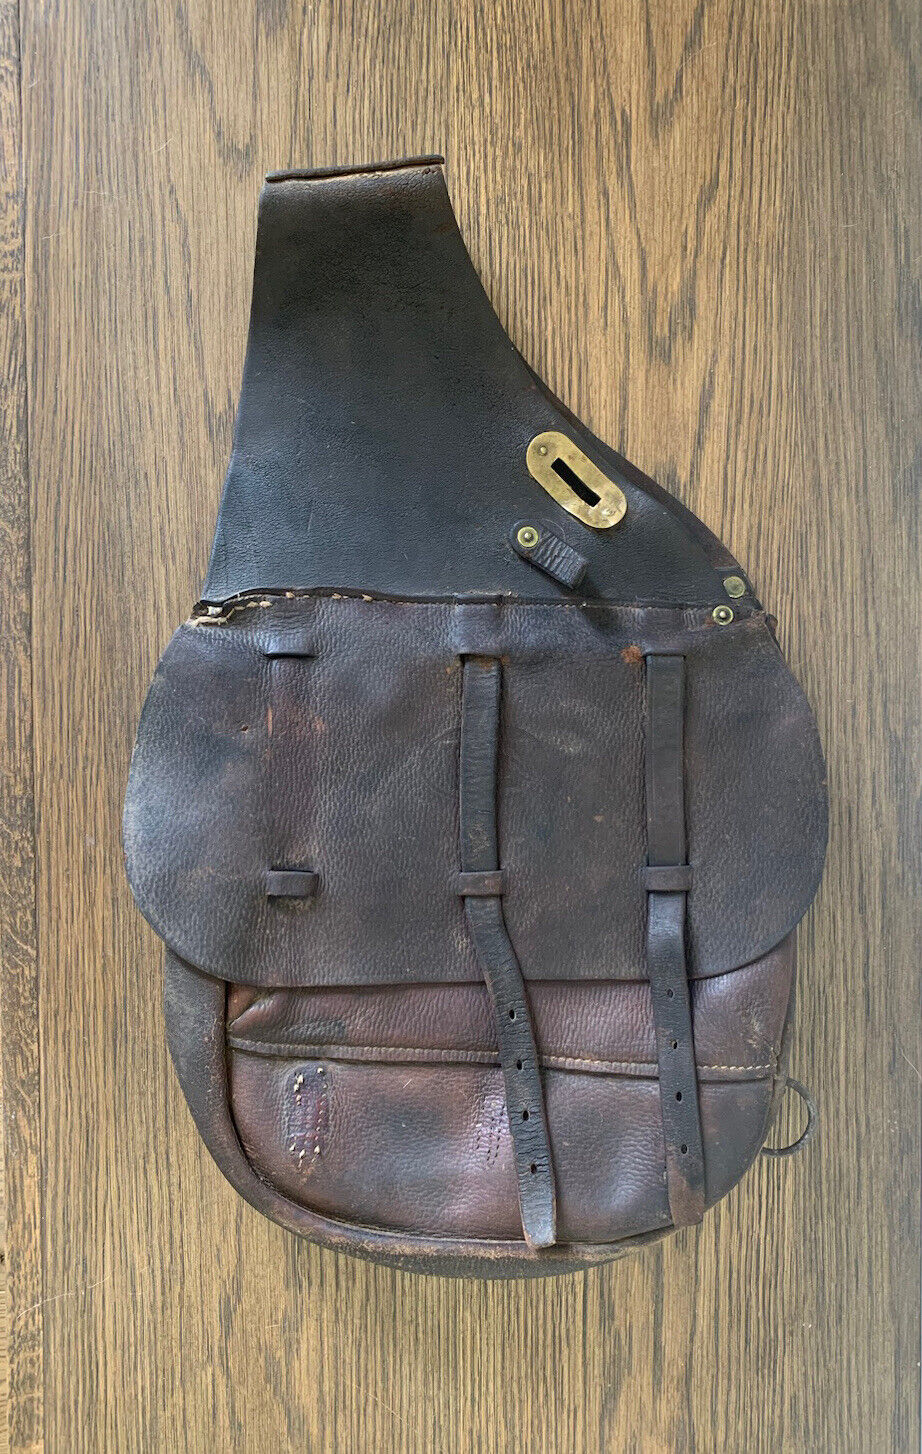 World War 1 US Cavalry Saddle Bags Marked 1917 Long 101st Cavalry 14th Regiment